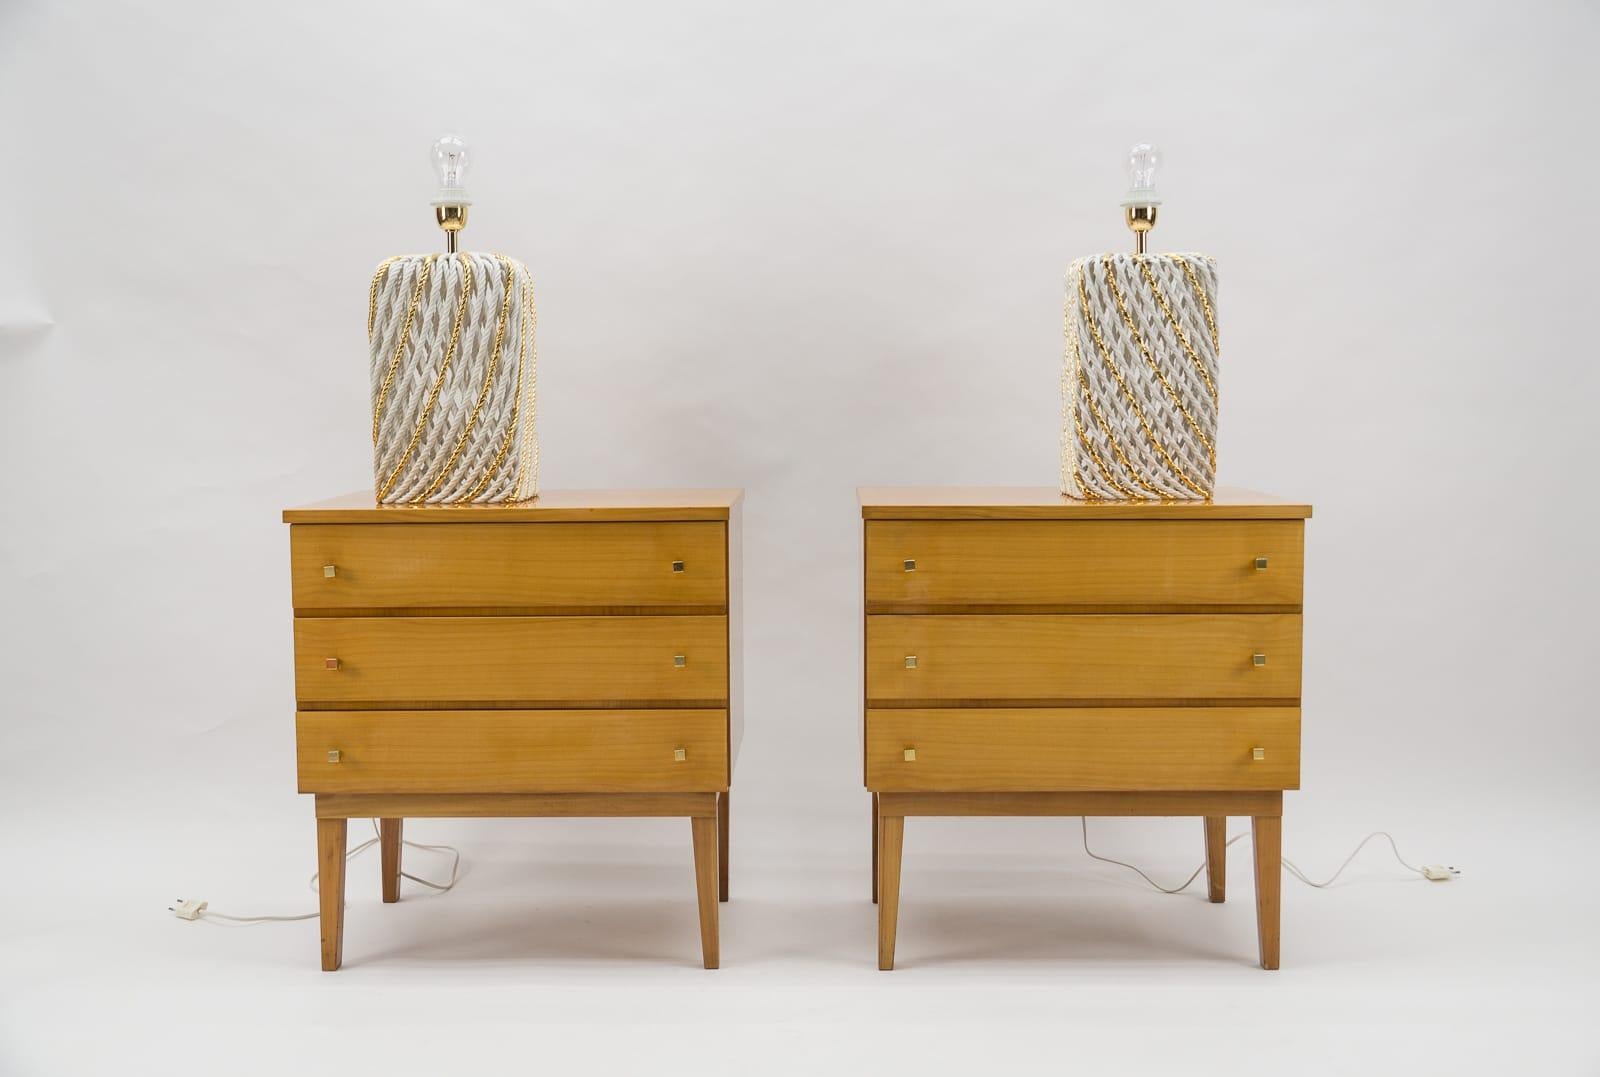  Mid-Century Modern Brass and Wood Nightstands, 1950s, Set of 2 For Sale 3